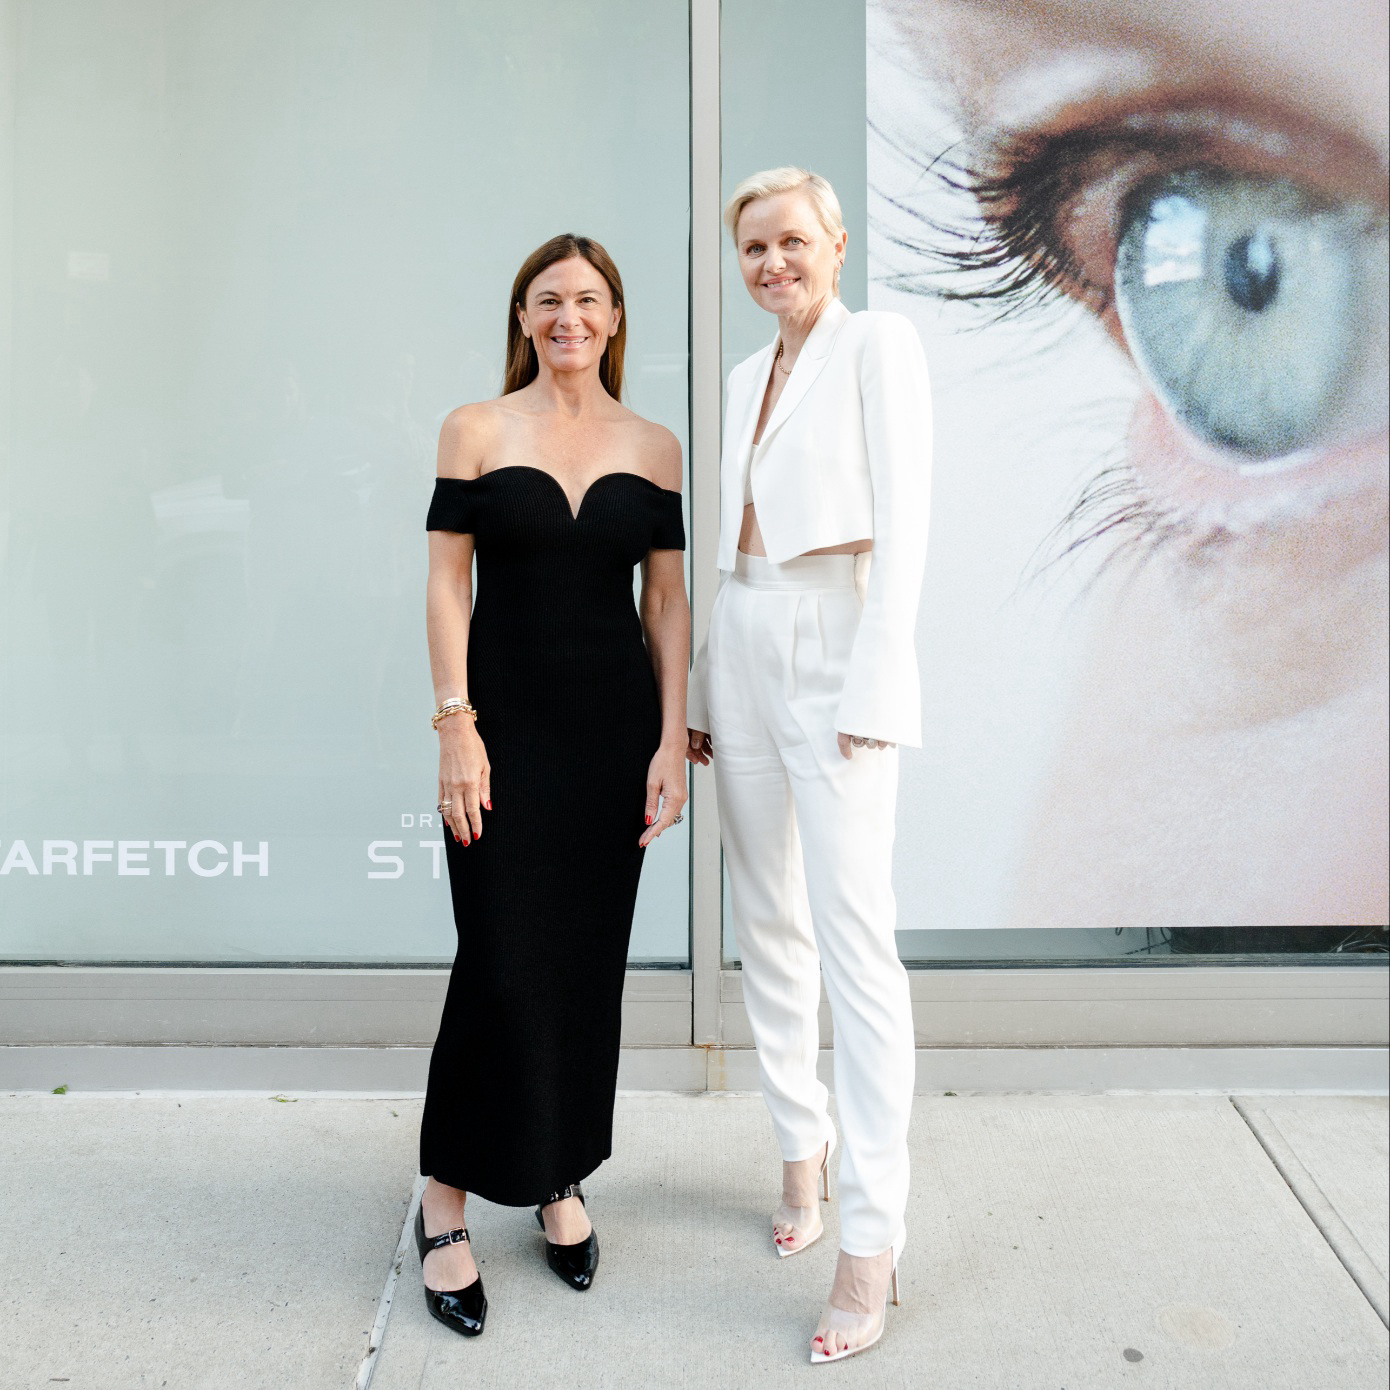 Dr. Barbara Sturm, FARFETCH and <em>Cultured</em> Join Forces to Merge Art and Science in Chelsea